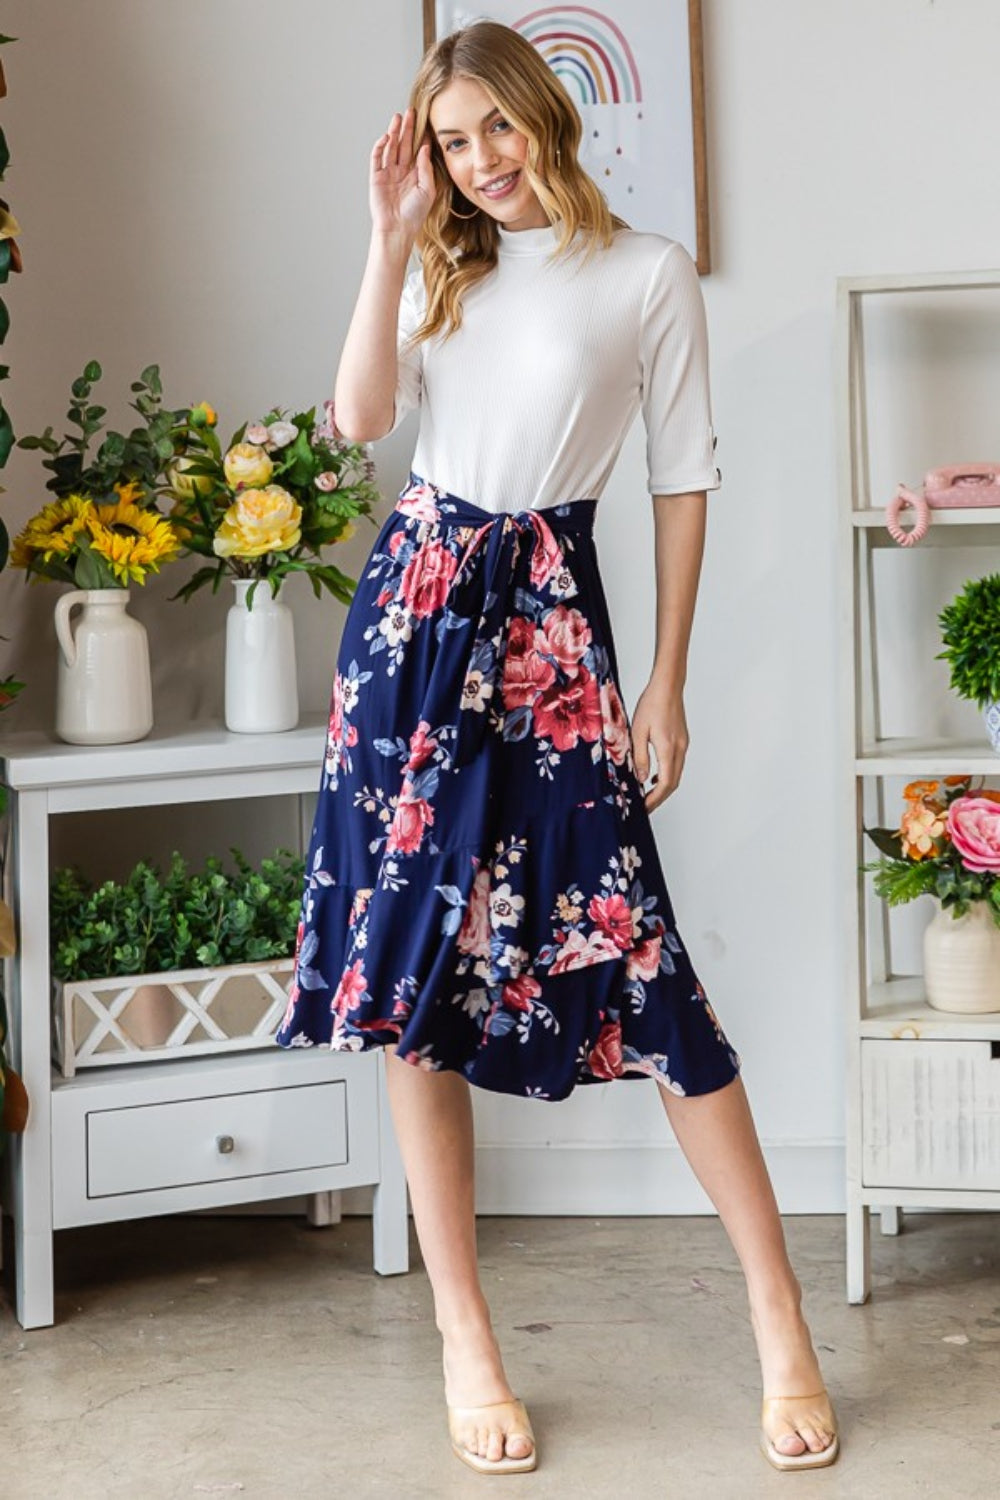 Reborn J Floral Wrap Ruffled Skirt-Skirts-Inspired by Justeen-Women's Clothing Boutique in Chicago, Illinois